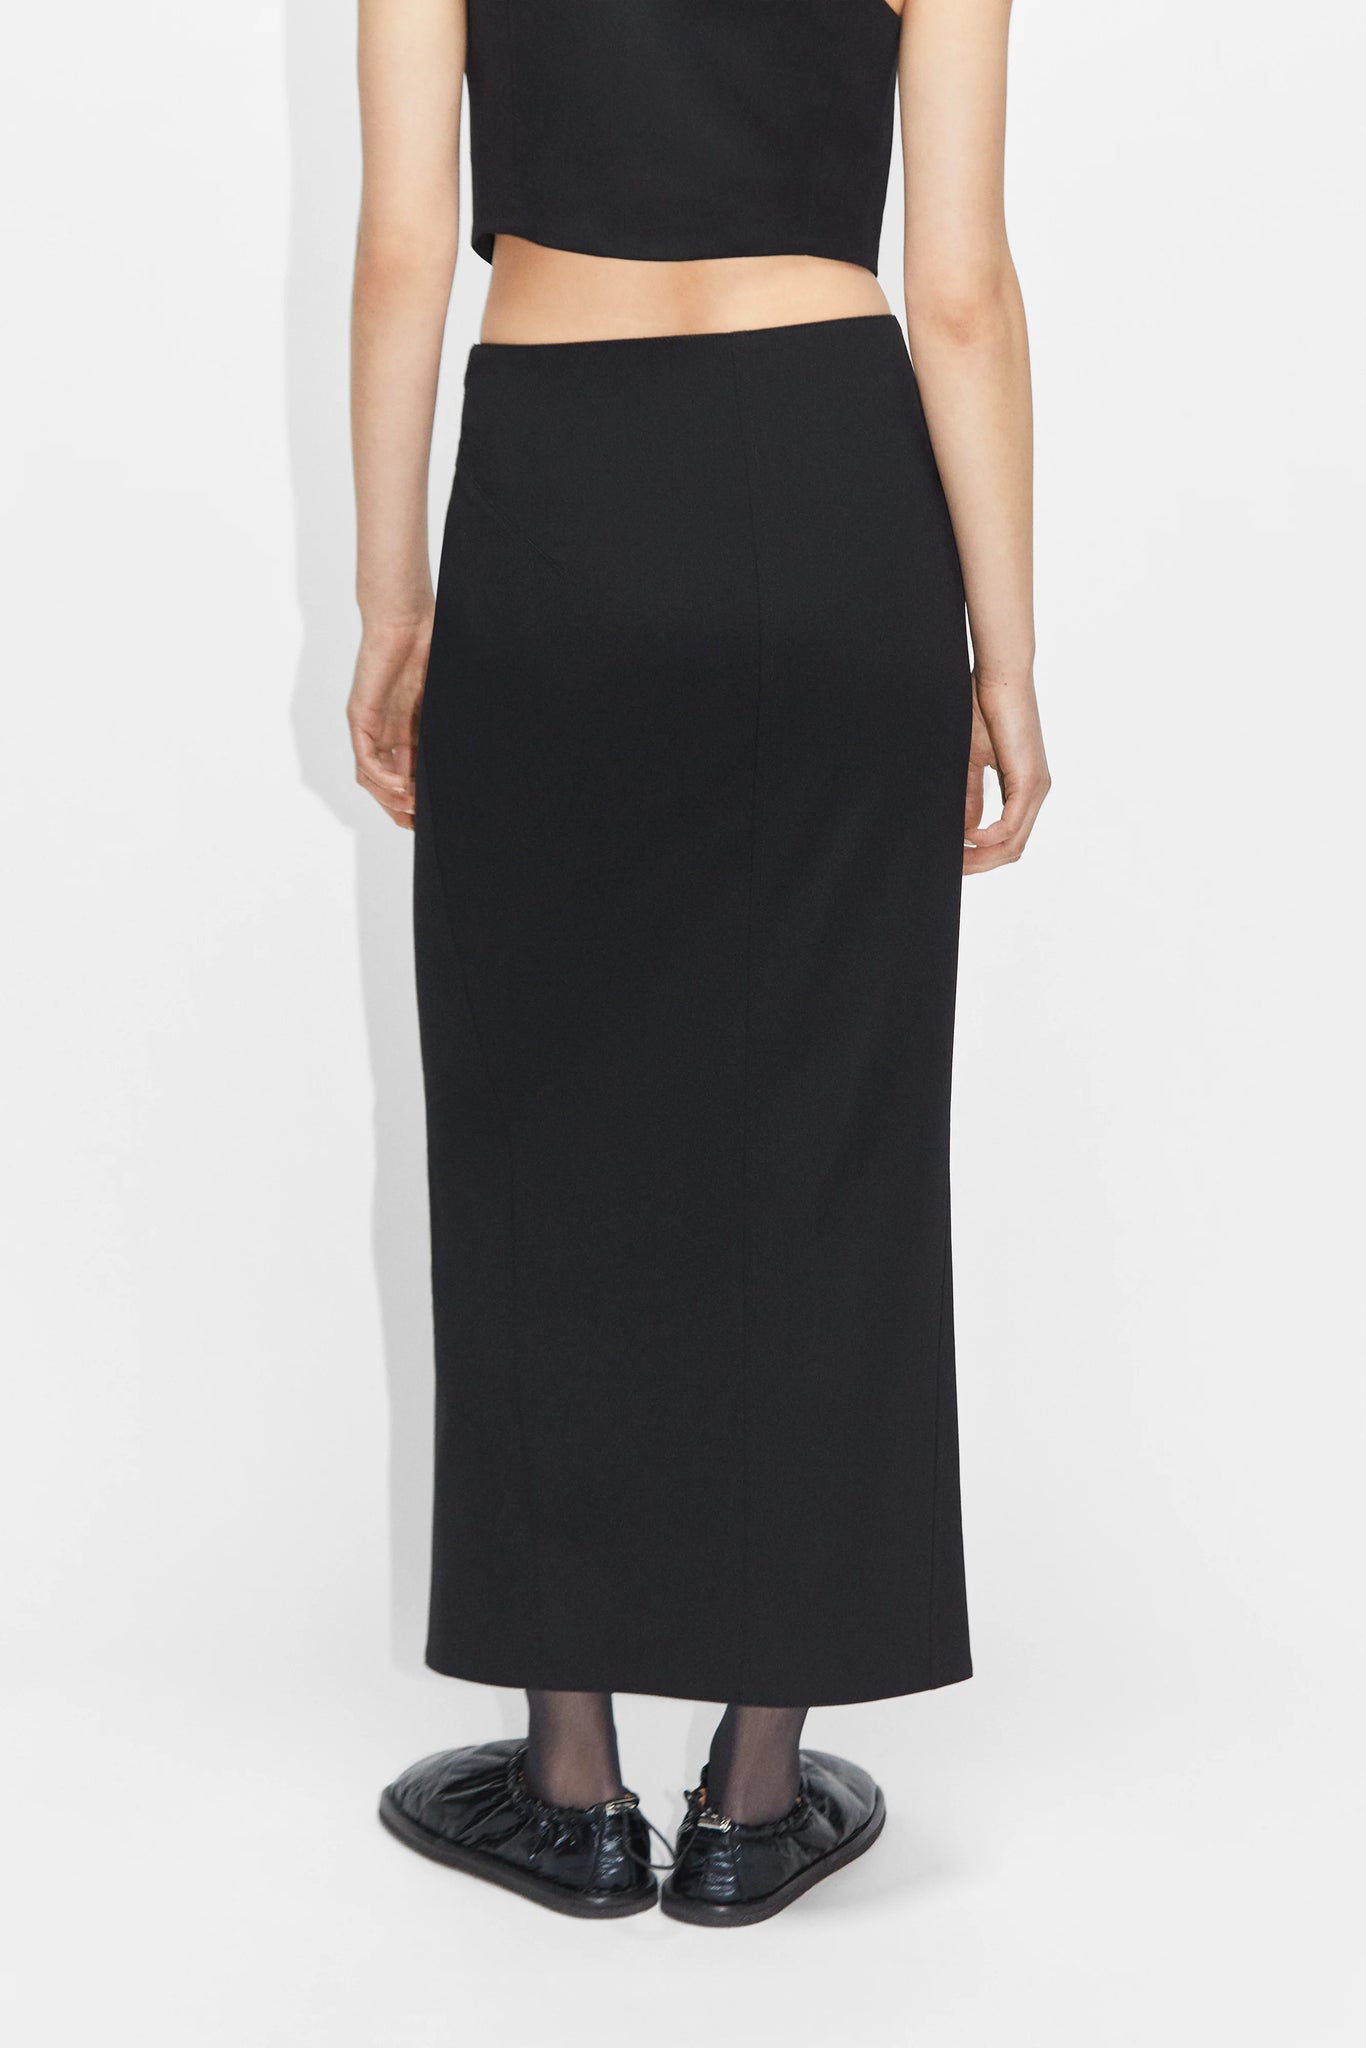 Tail overlapping pencil skirt in black